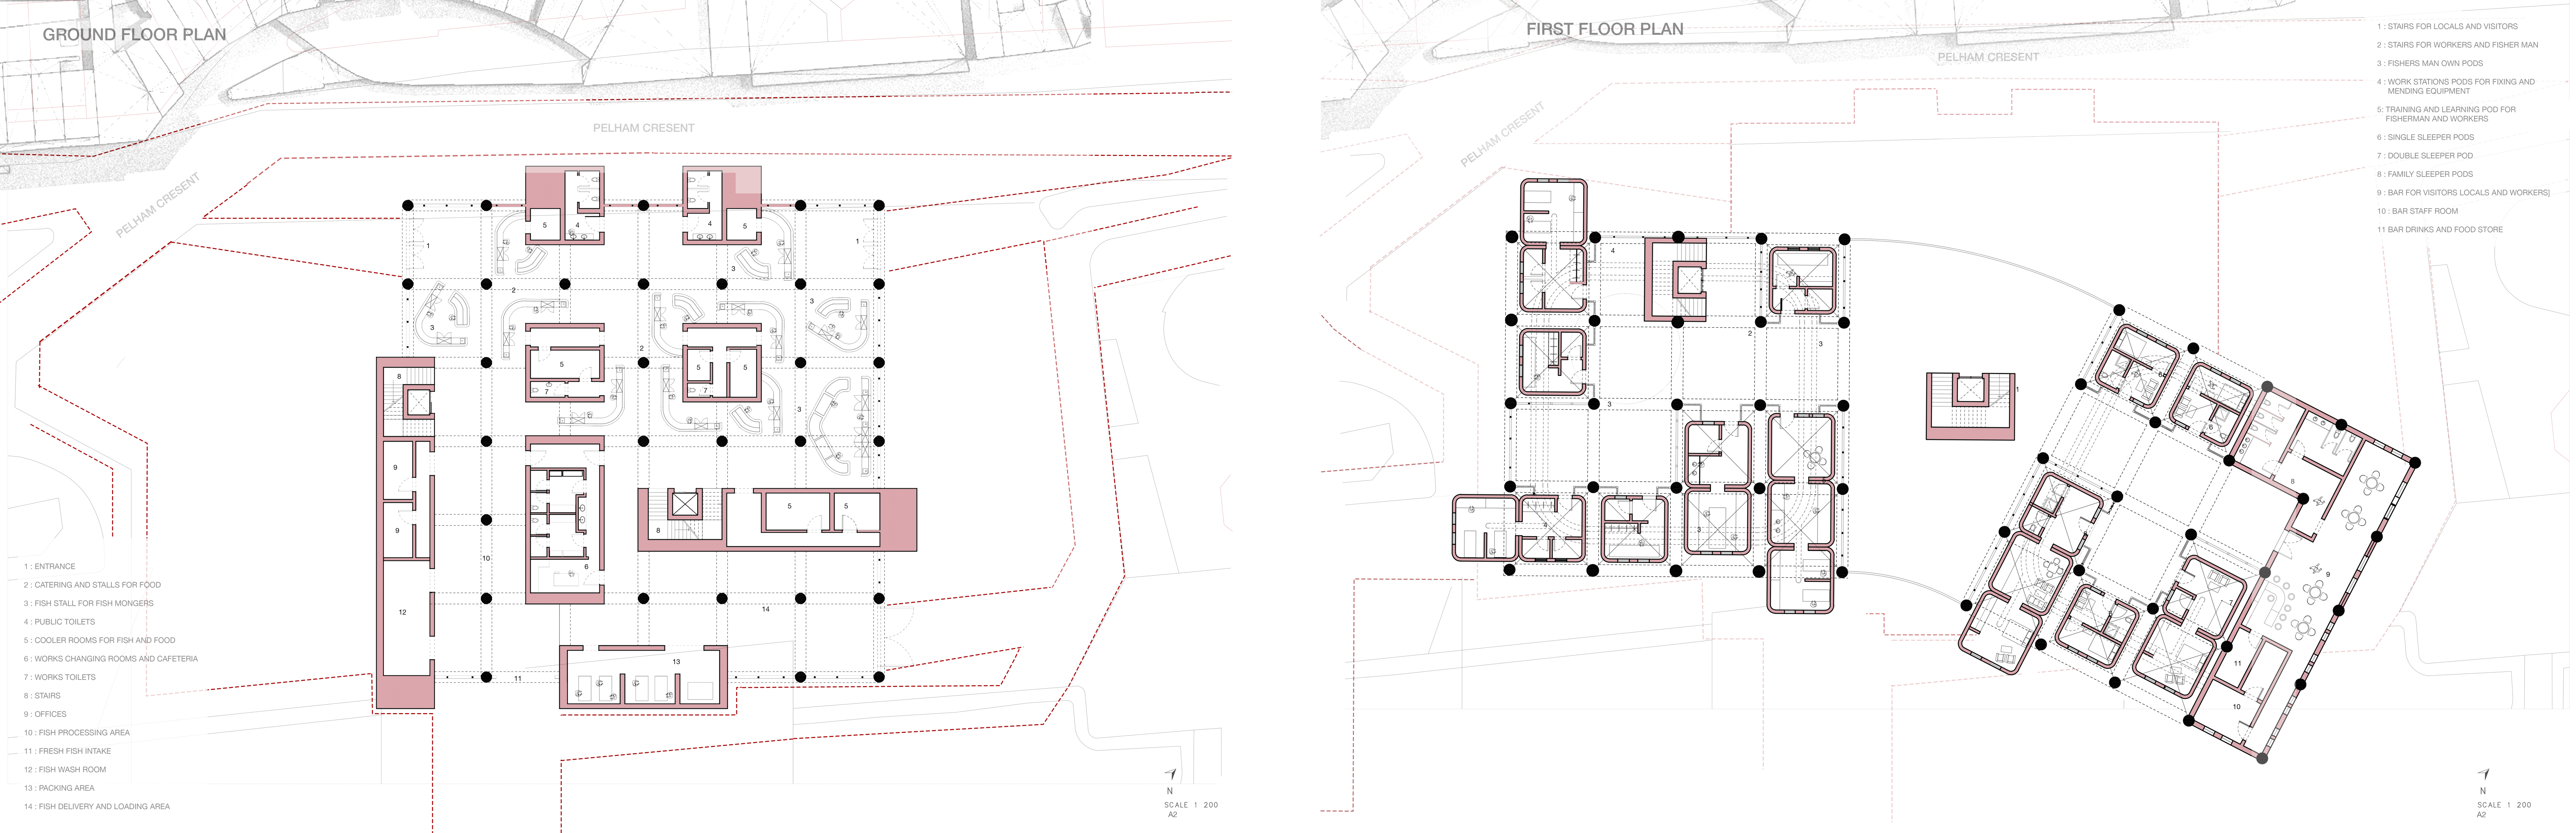 Images displaying floor plans of the building.